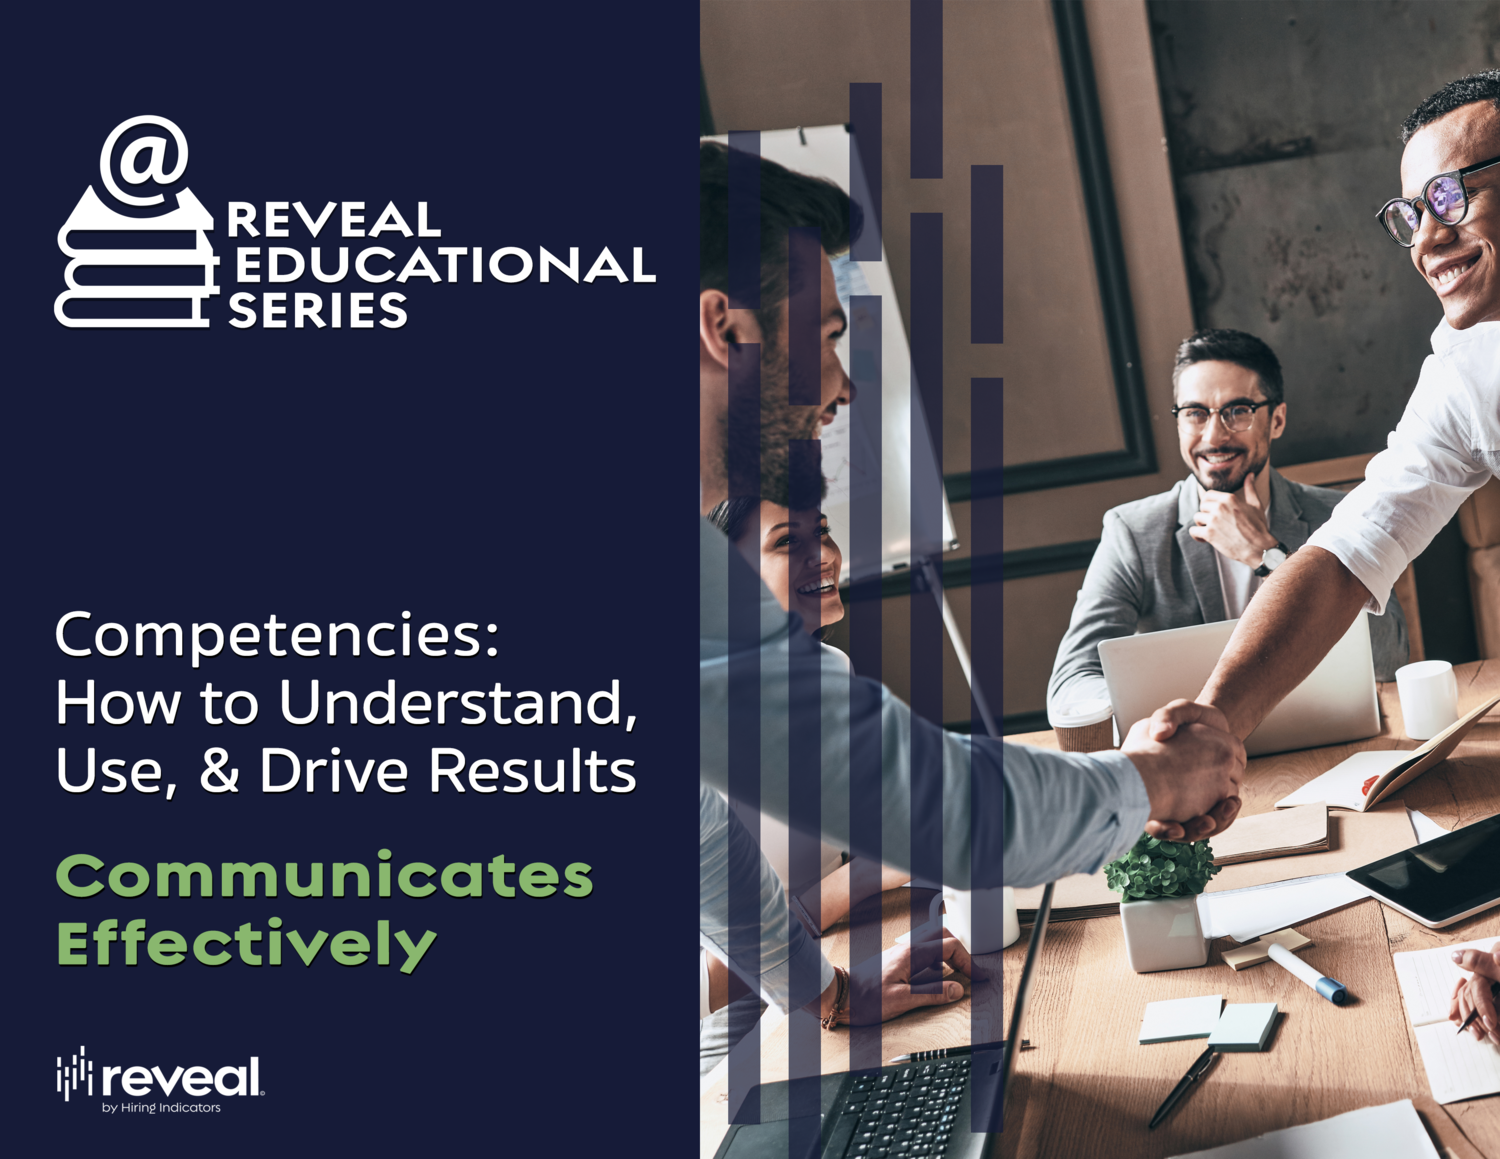 Reveal Educational Series, Communicated Effectively